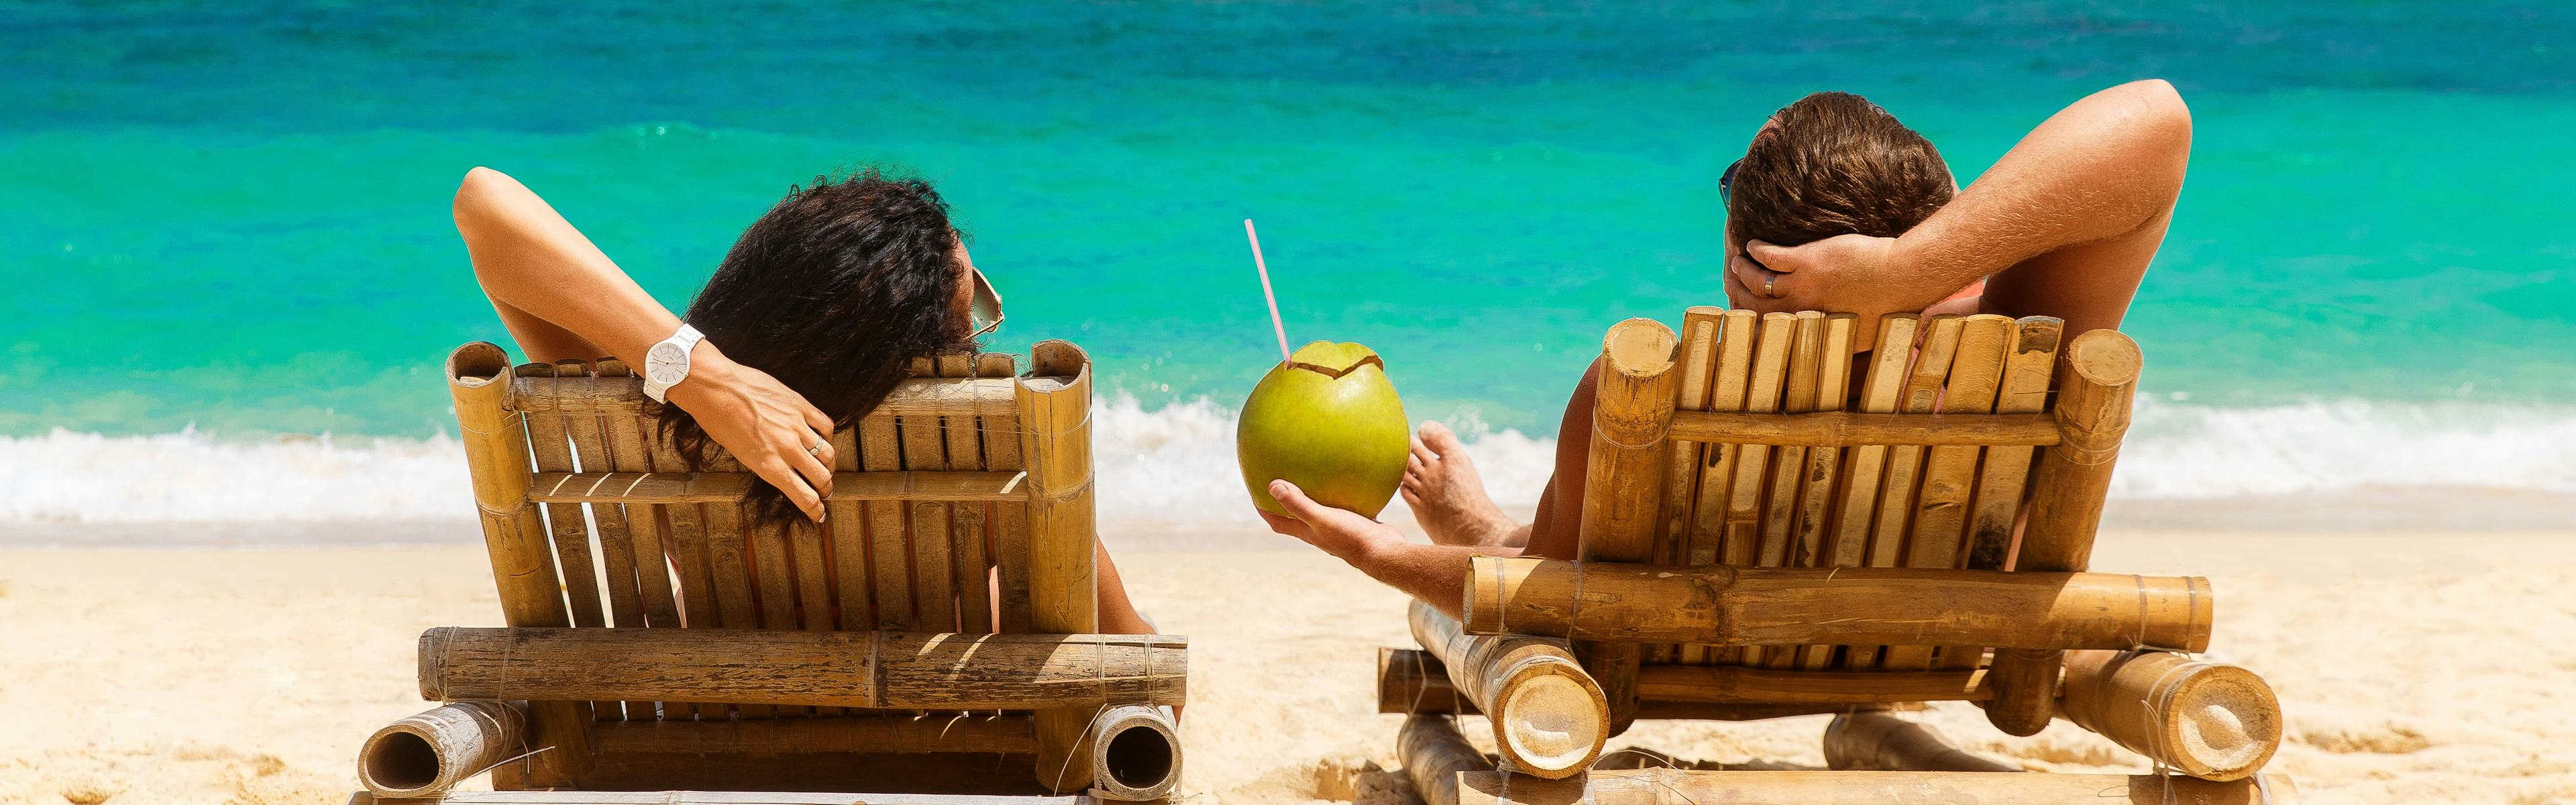 Couple on the beach drinking from a coconut 